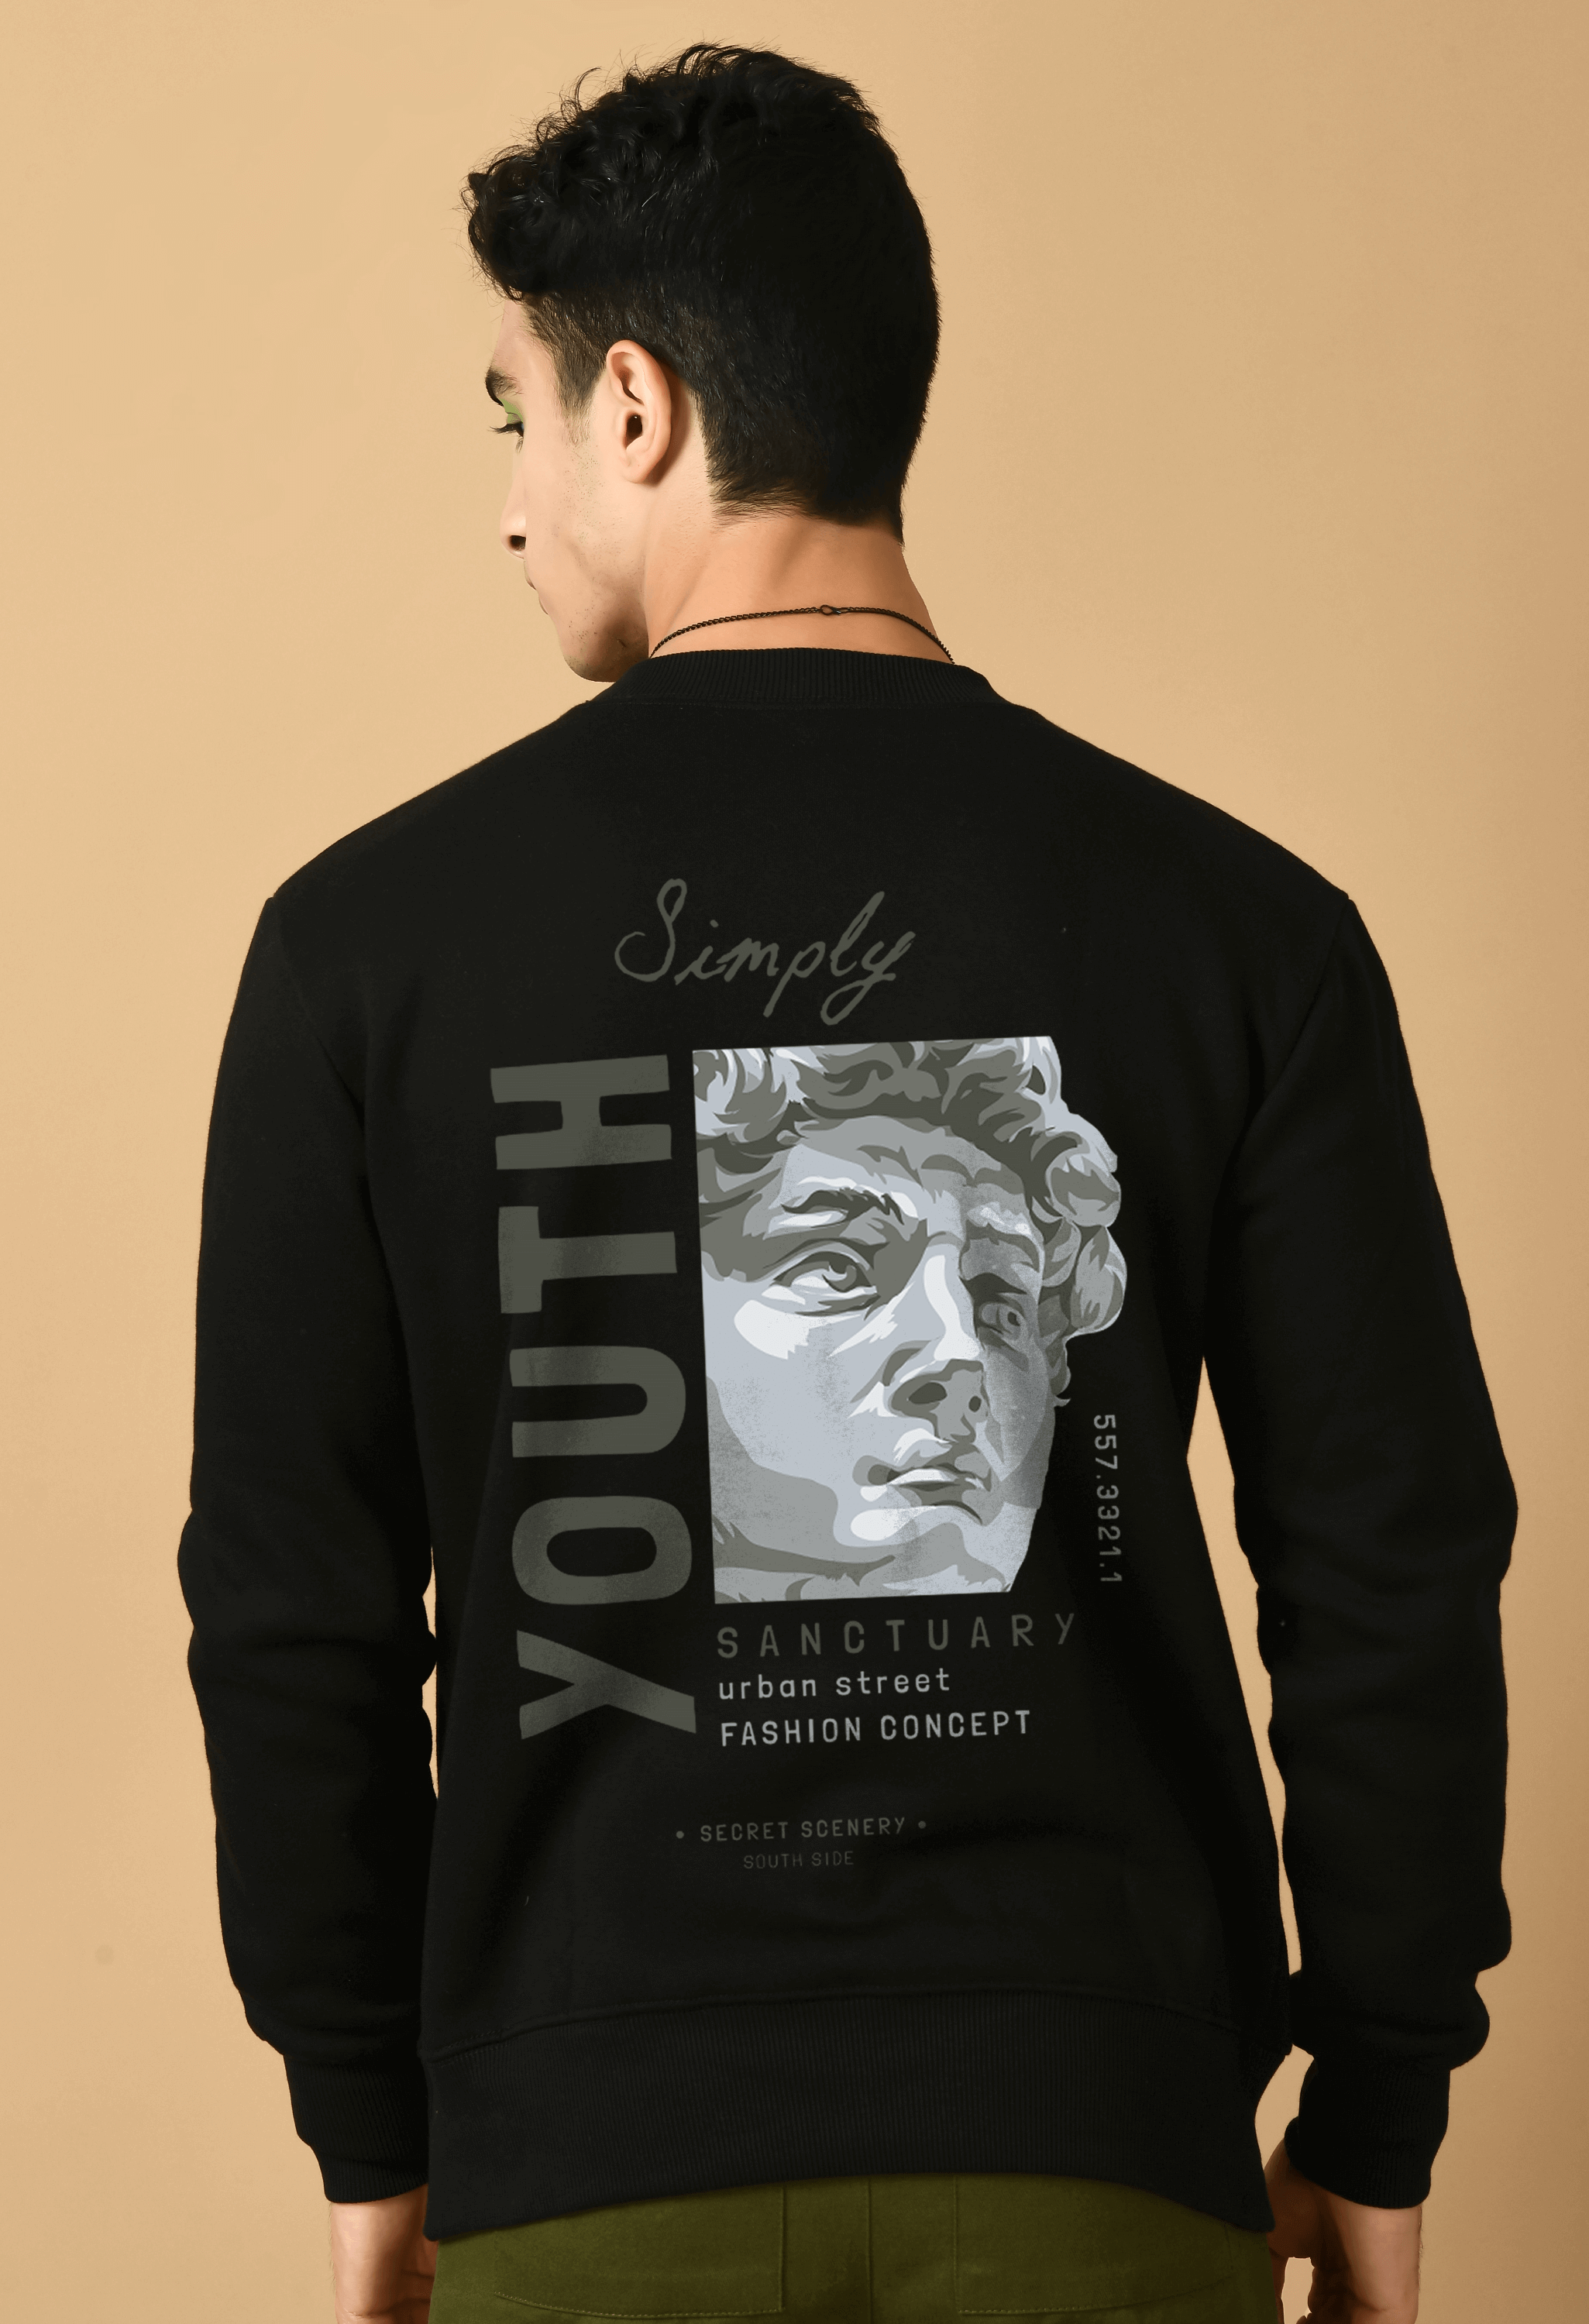 Black youth printed black color sweatshirt by offmint